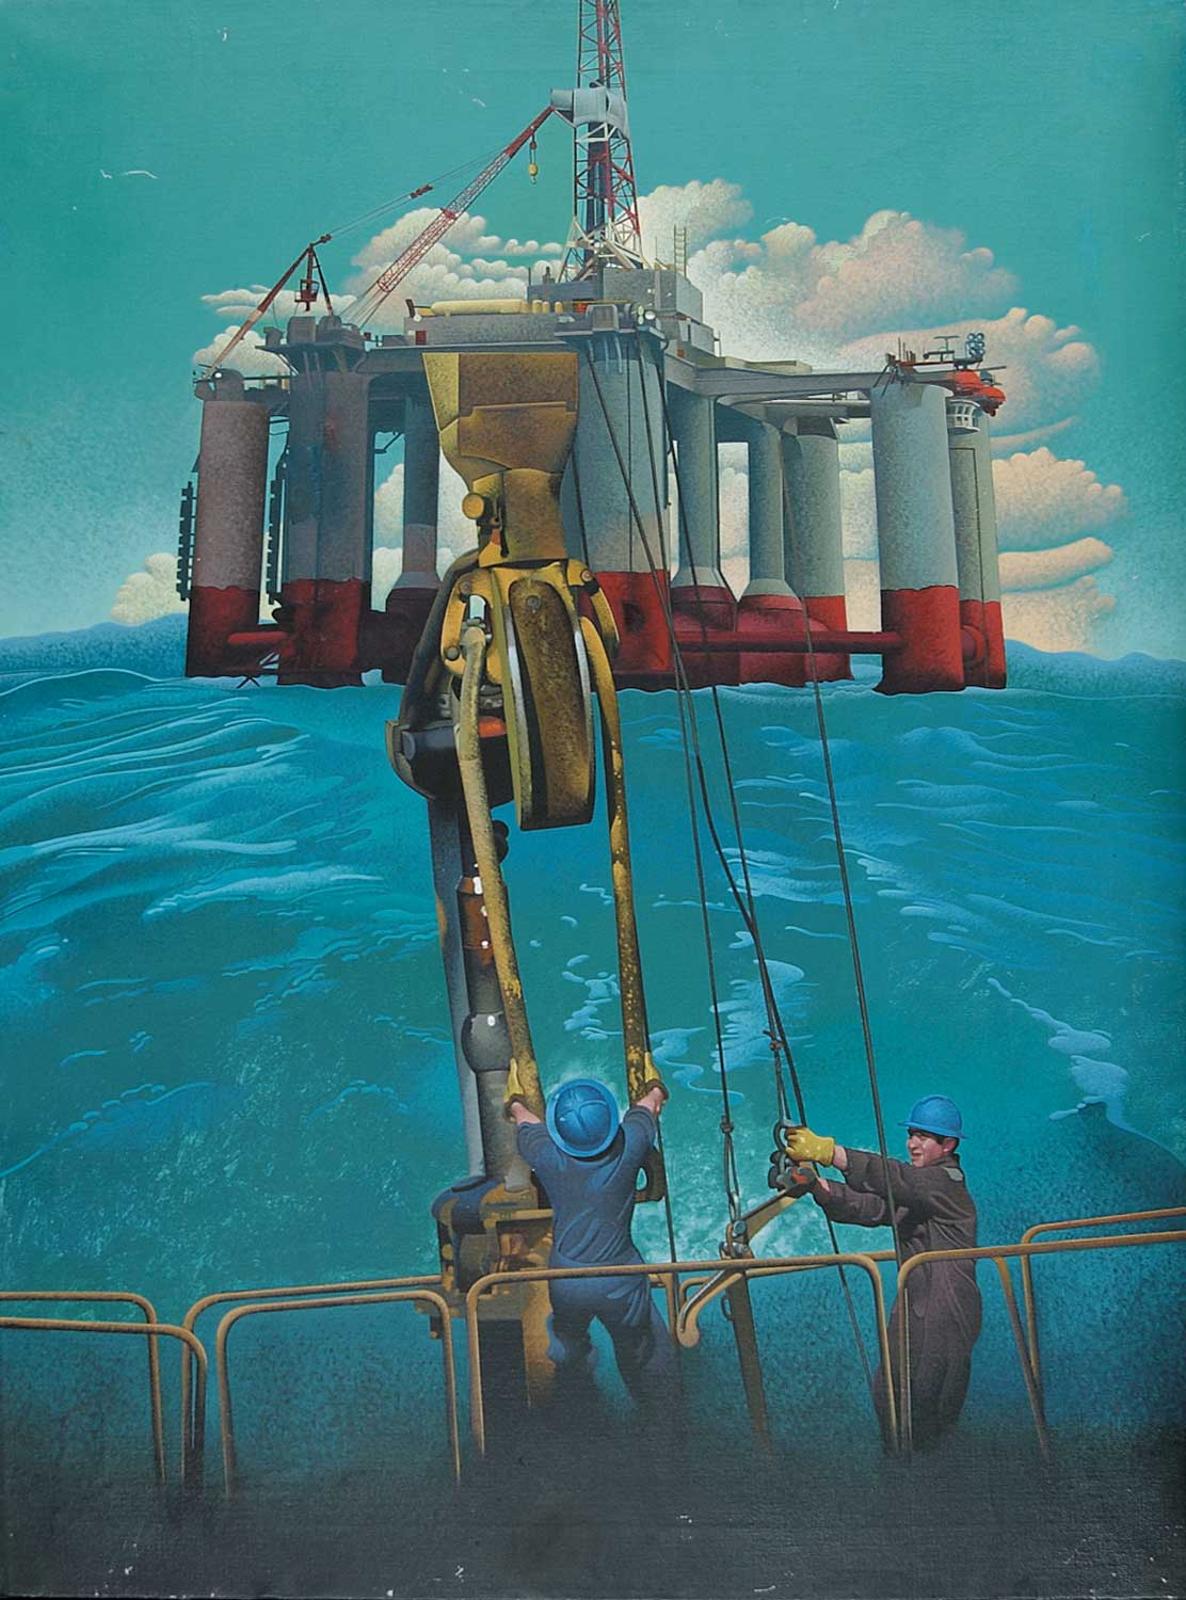 Wilson McLean - Untitled - Gas and Oil Exploration, Drilling for Oil at Sea